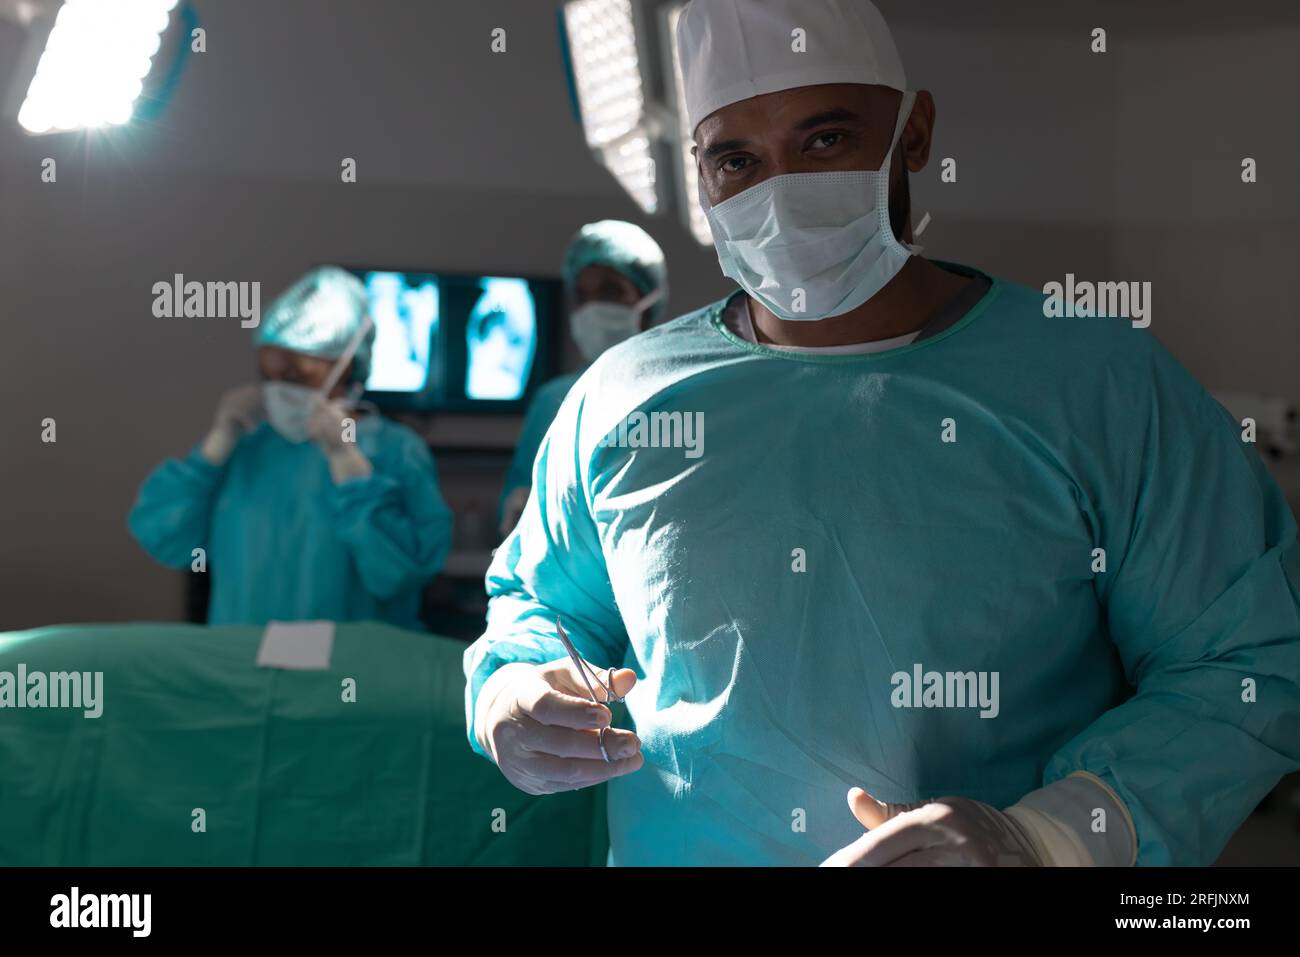 Portrait of biracial male surgeon wearing surgical gown in operating theatre at hospital Stock Photo